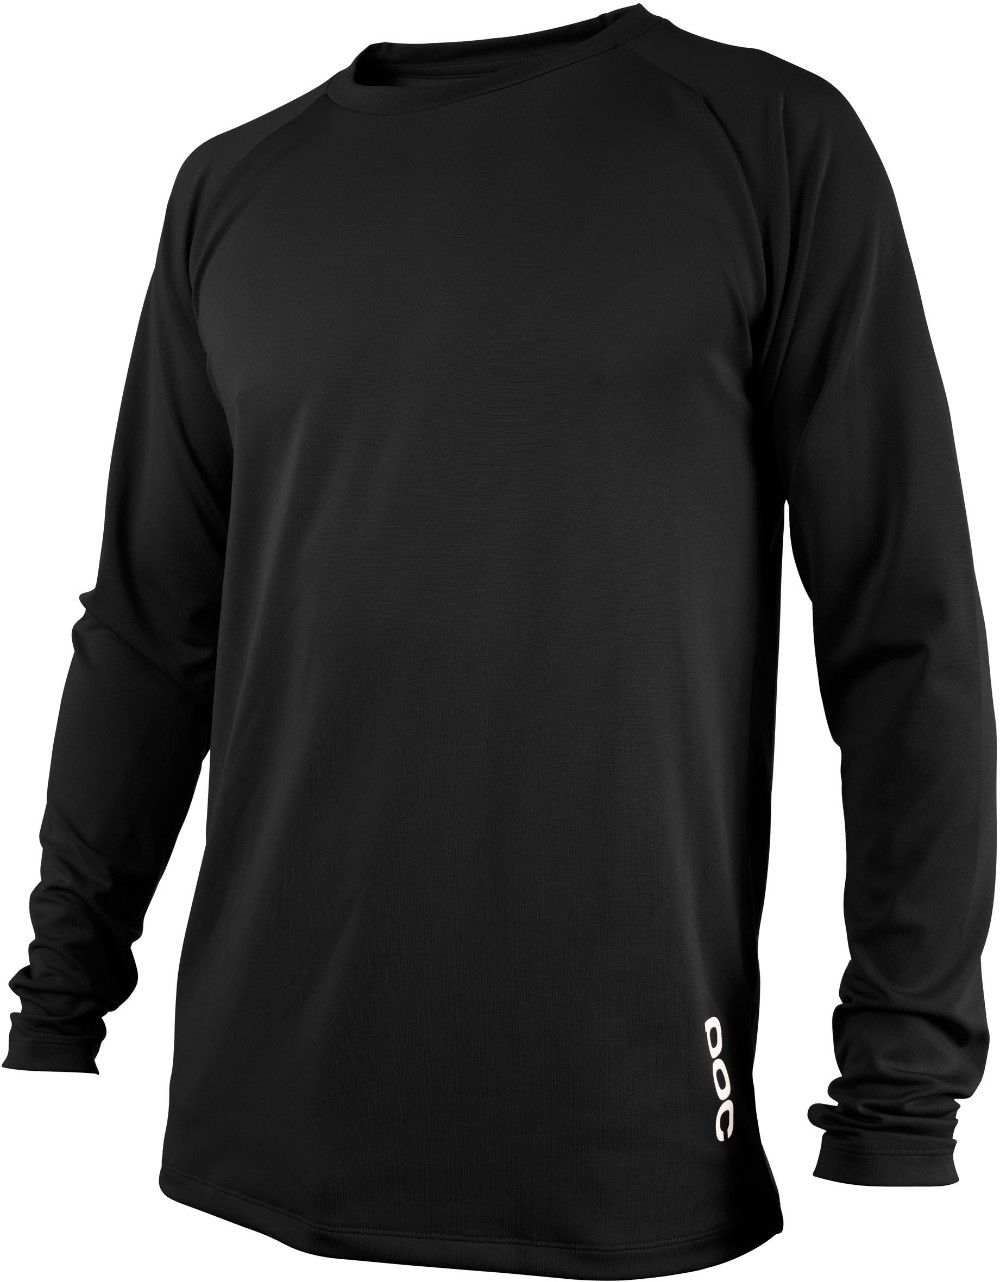 Essential DH Long Sleeve Cycling Jersey image 0